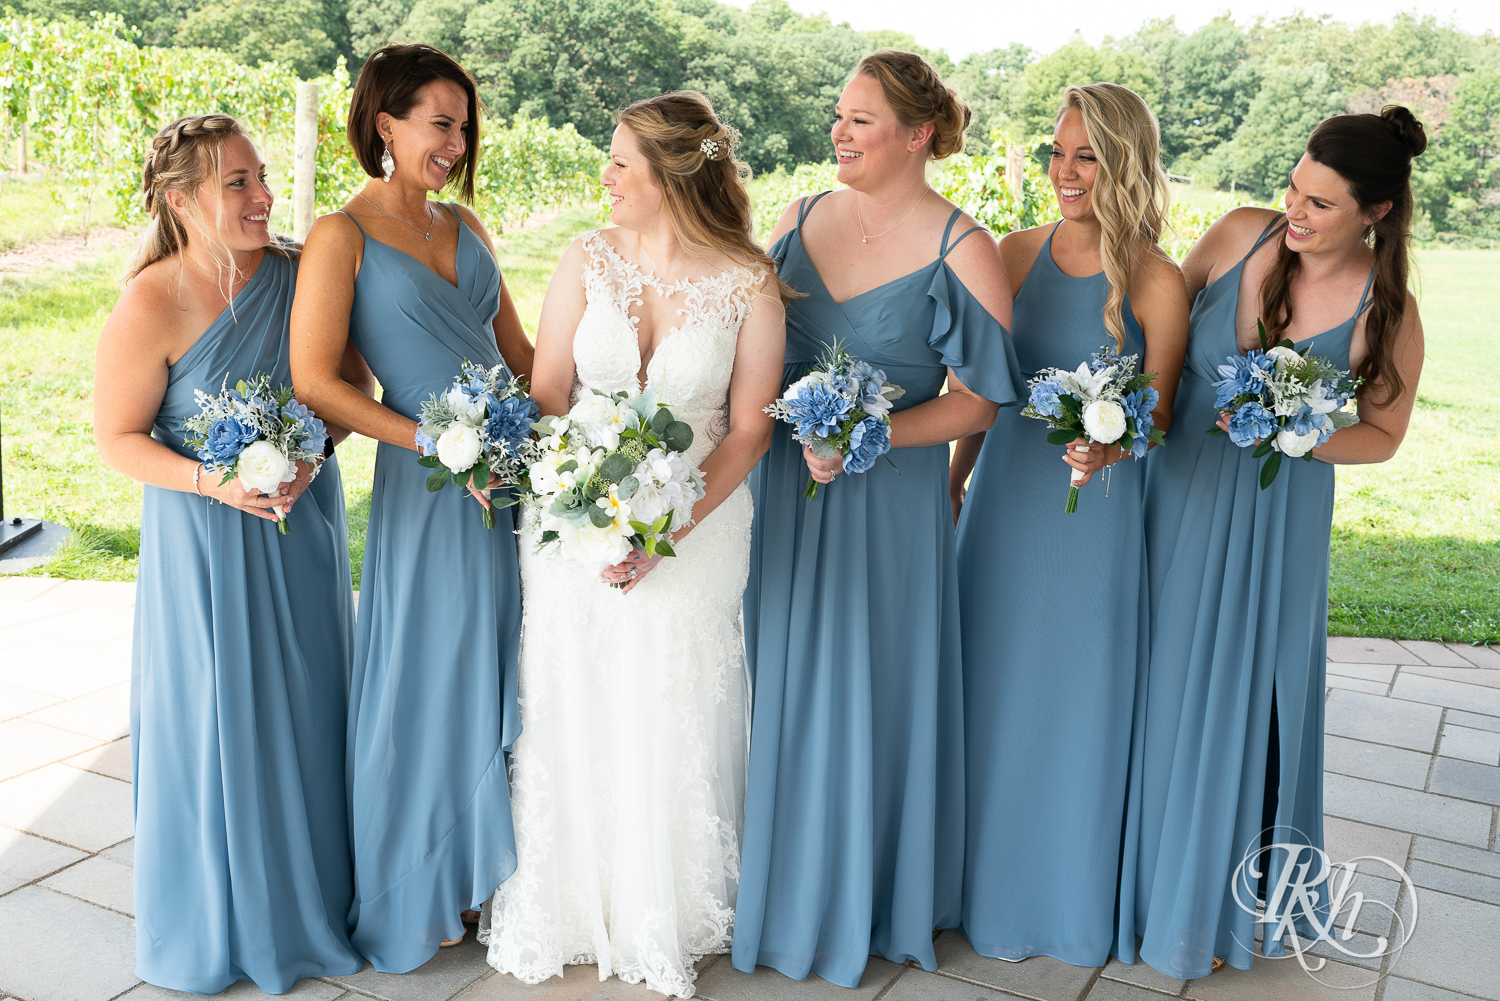 Wedding party in blue dresses smiling at 7 Vines Vineyard in Dellwood, Minnesota.